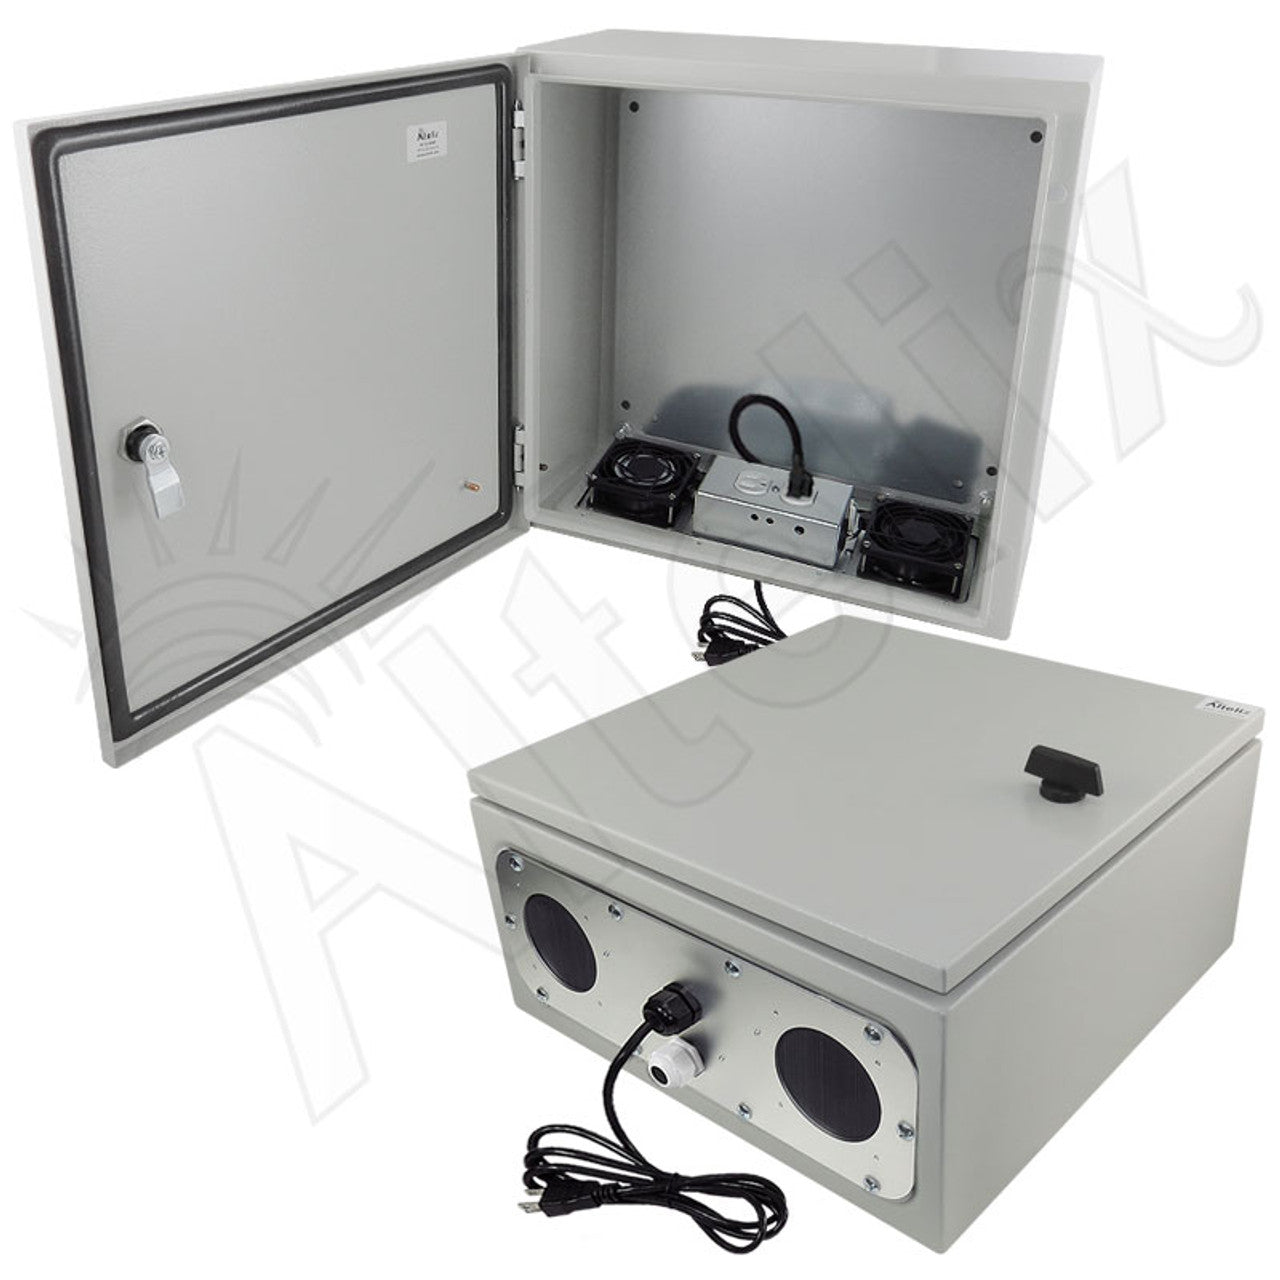 Altelix Steel Heated Weatherproof NEMA Enclosure with Dual Cooling Fans, 200W Heater, 120 VAC Outlets and Power Cord